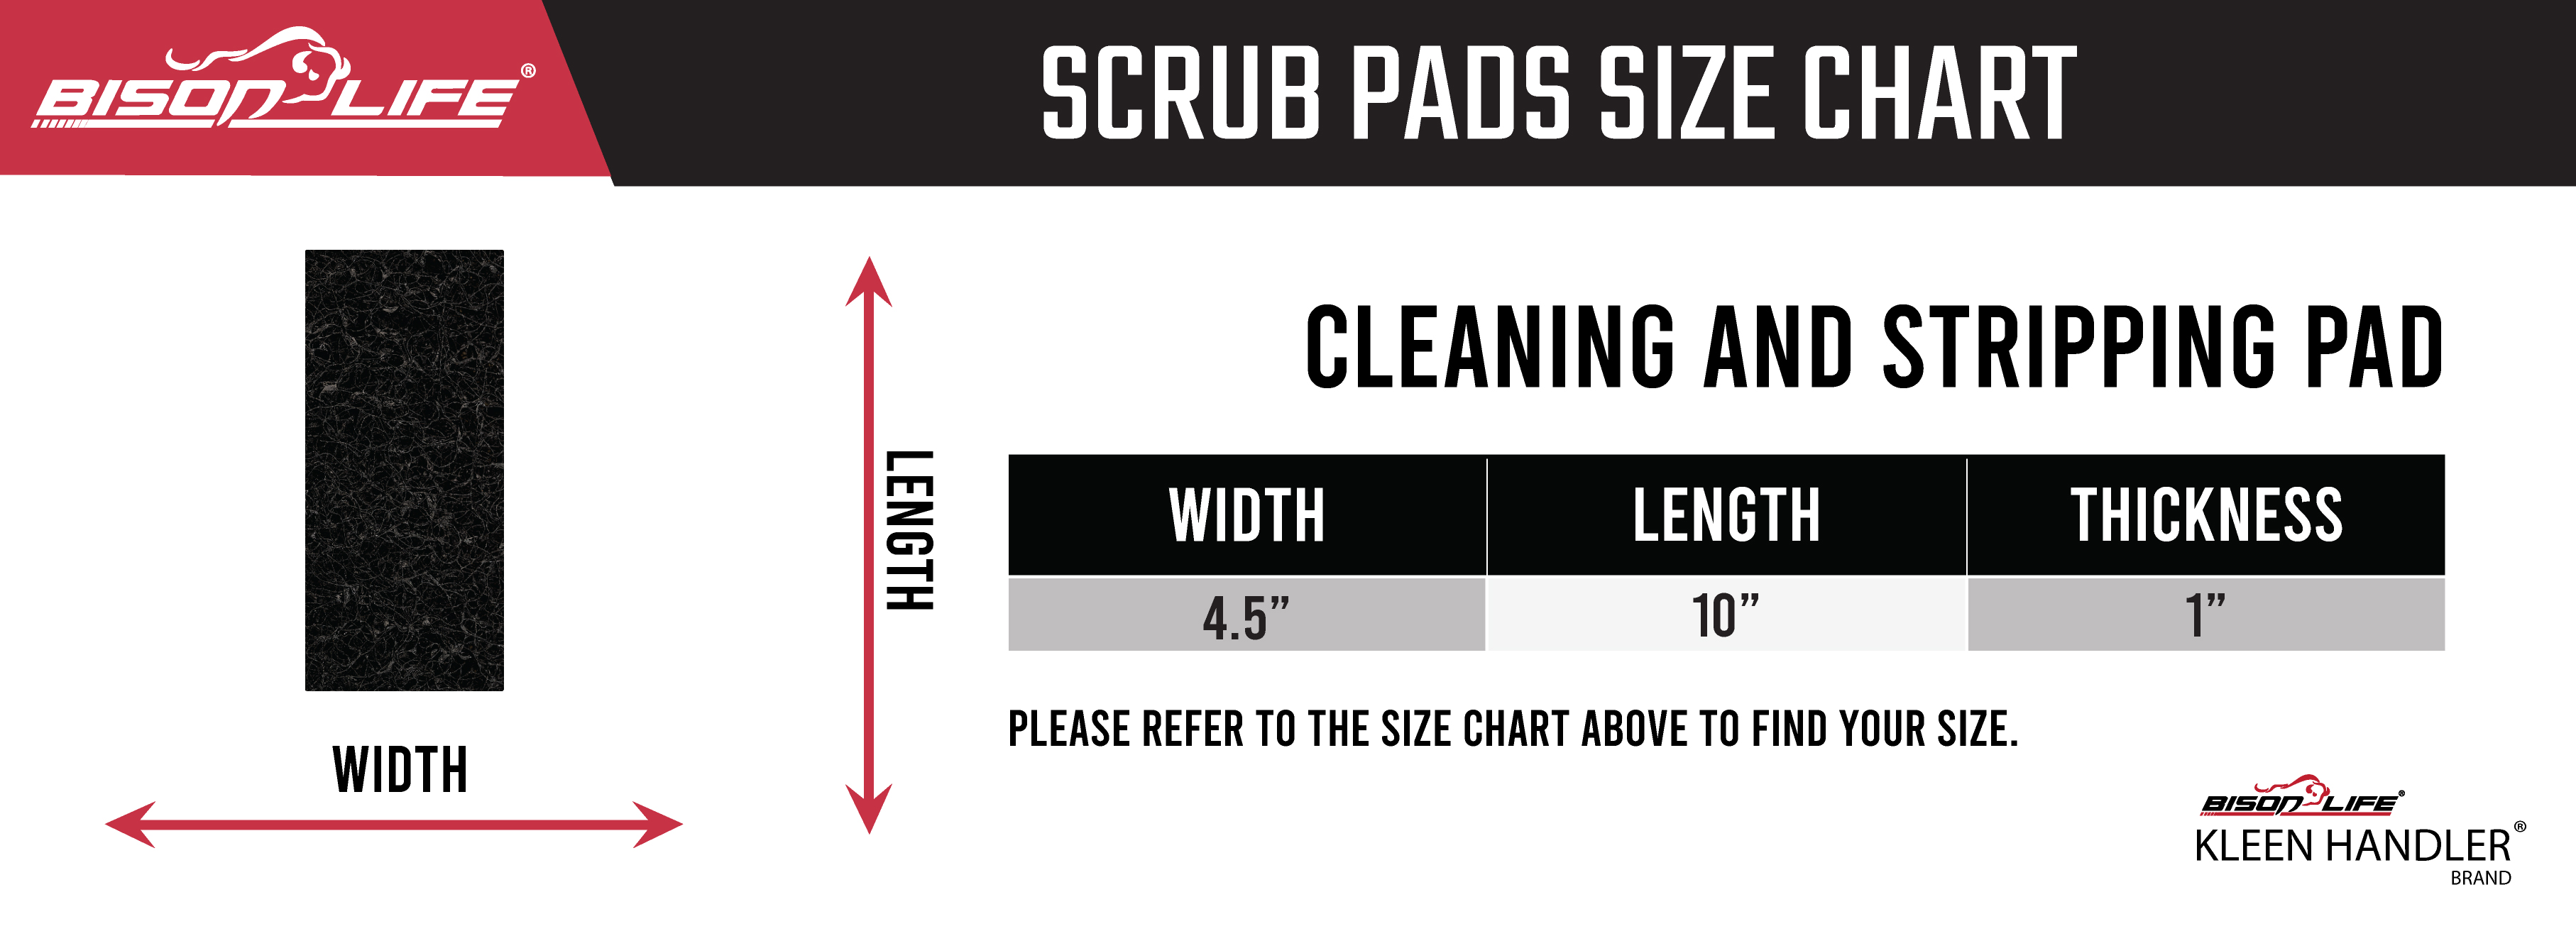 Stripping Pad Size Chart